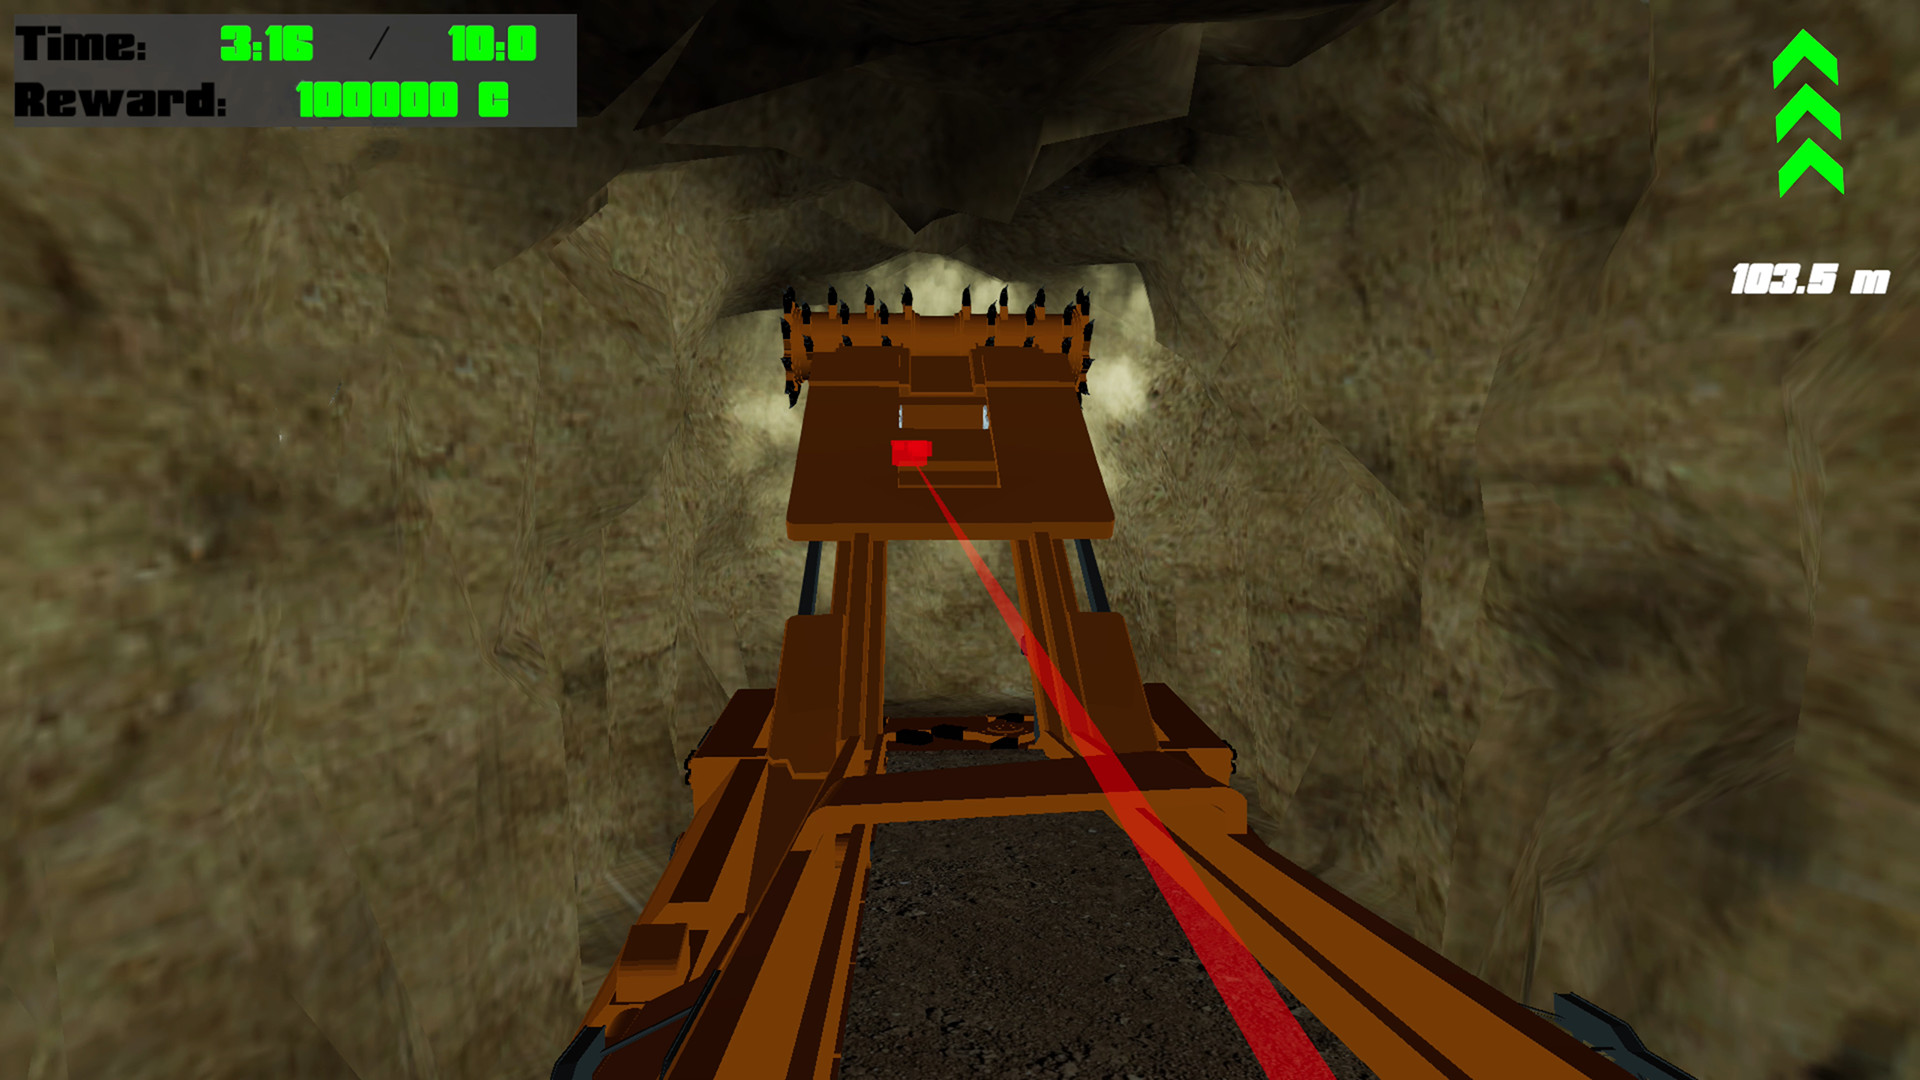 Mining & Tunneling Simulator game revenue and stats on Steam